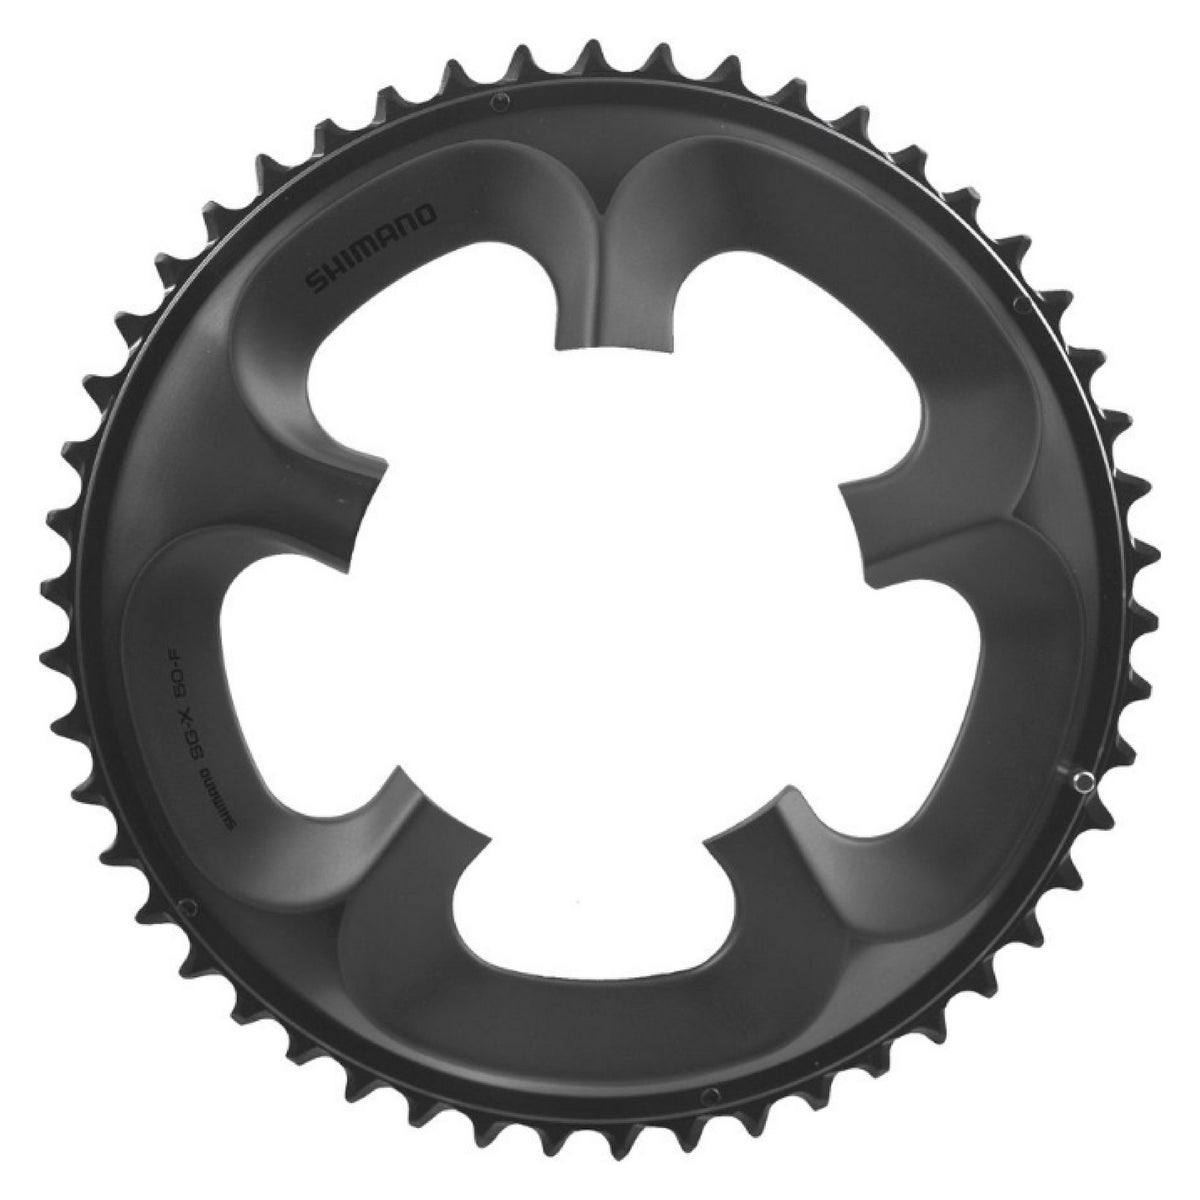 Shimano Ultegra FC6750 10sp Compact Chainrings